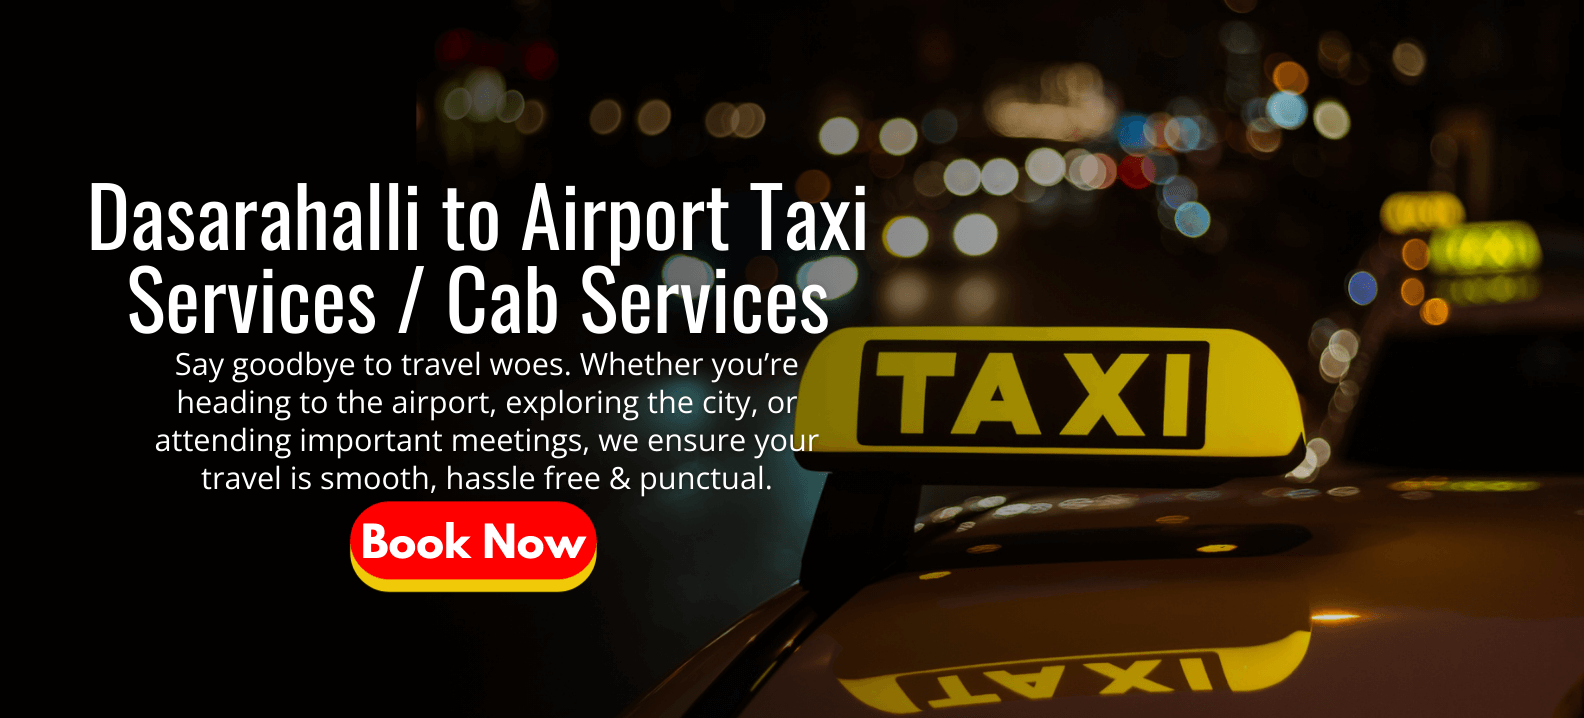 Dasarahalli to Airport Taxi Services Cab Services